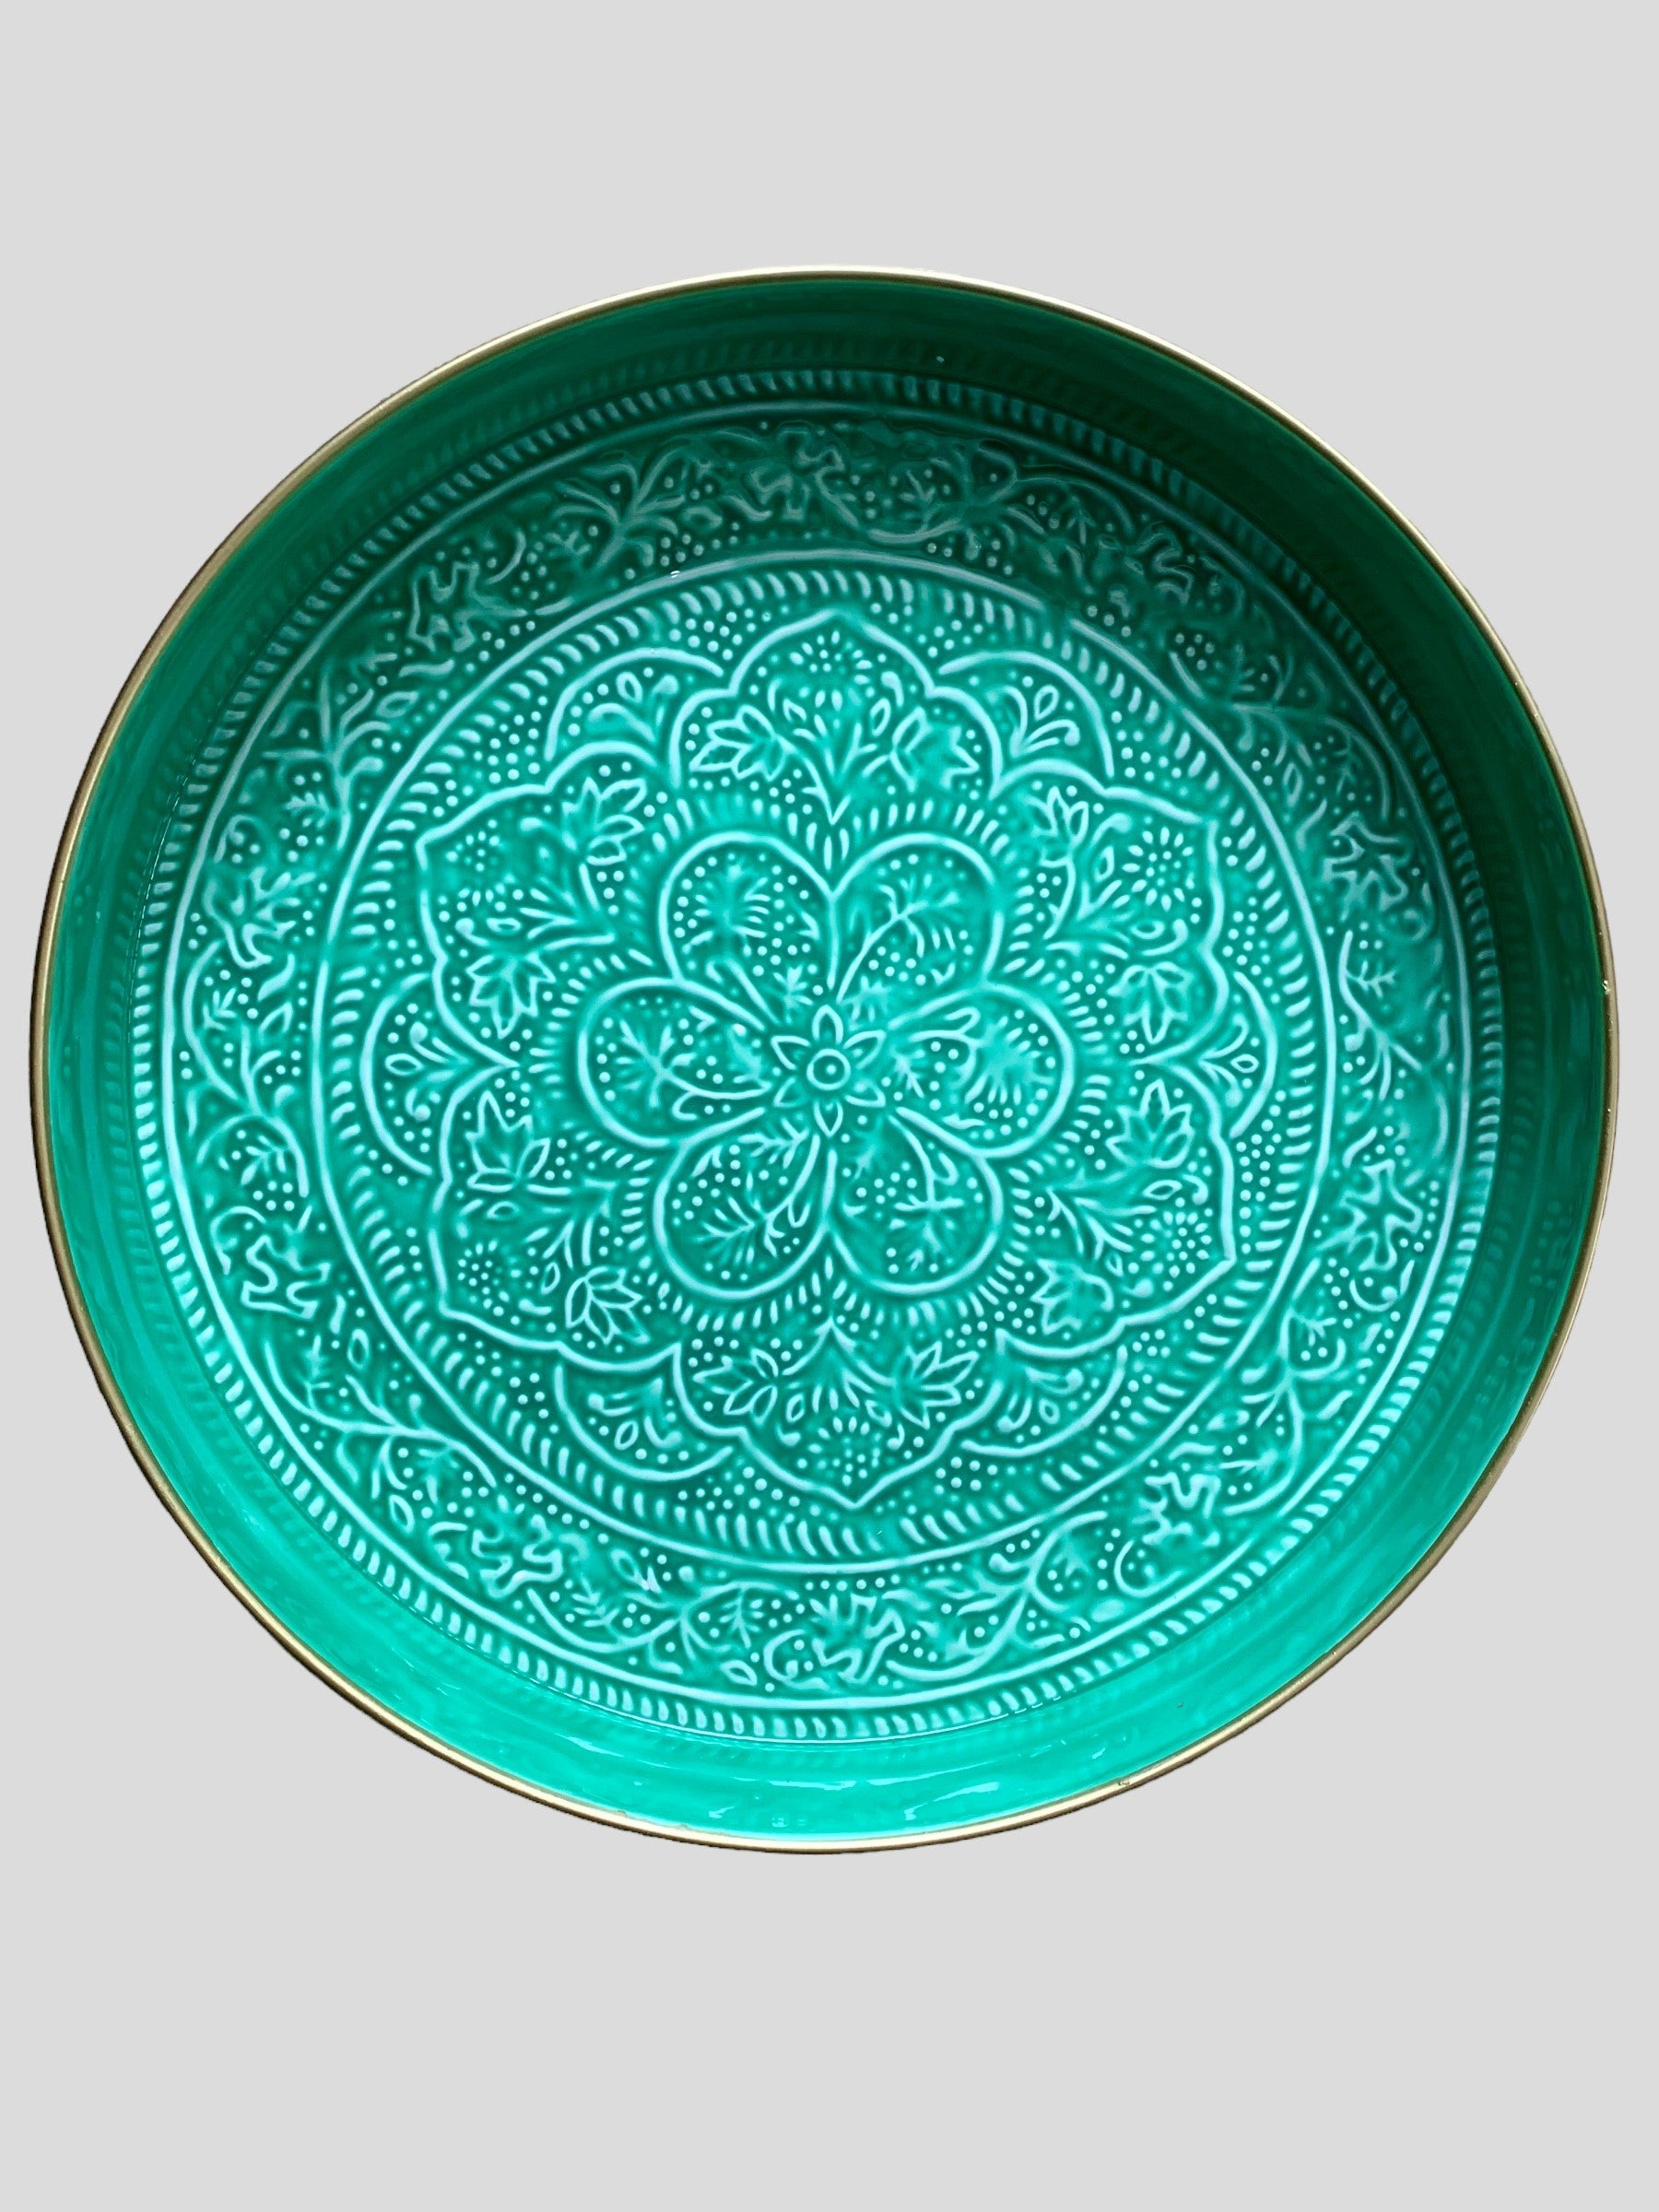 A large round green enamel serving tray with embossed detail